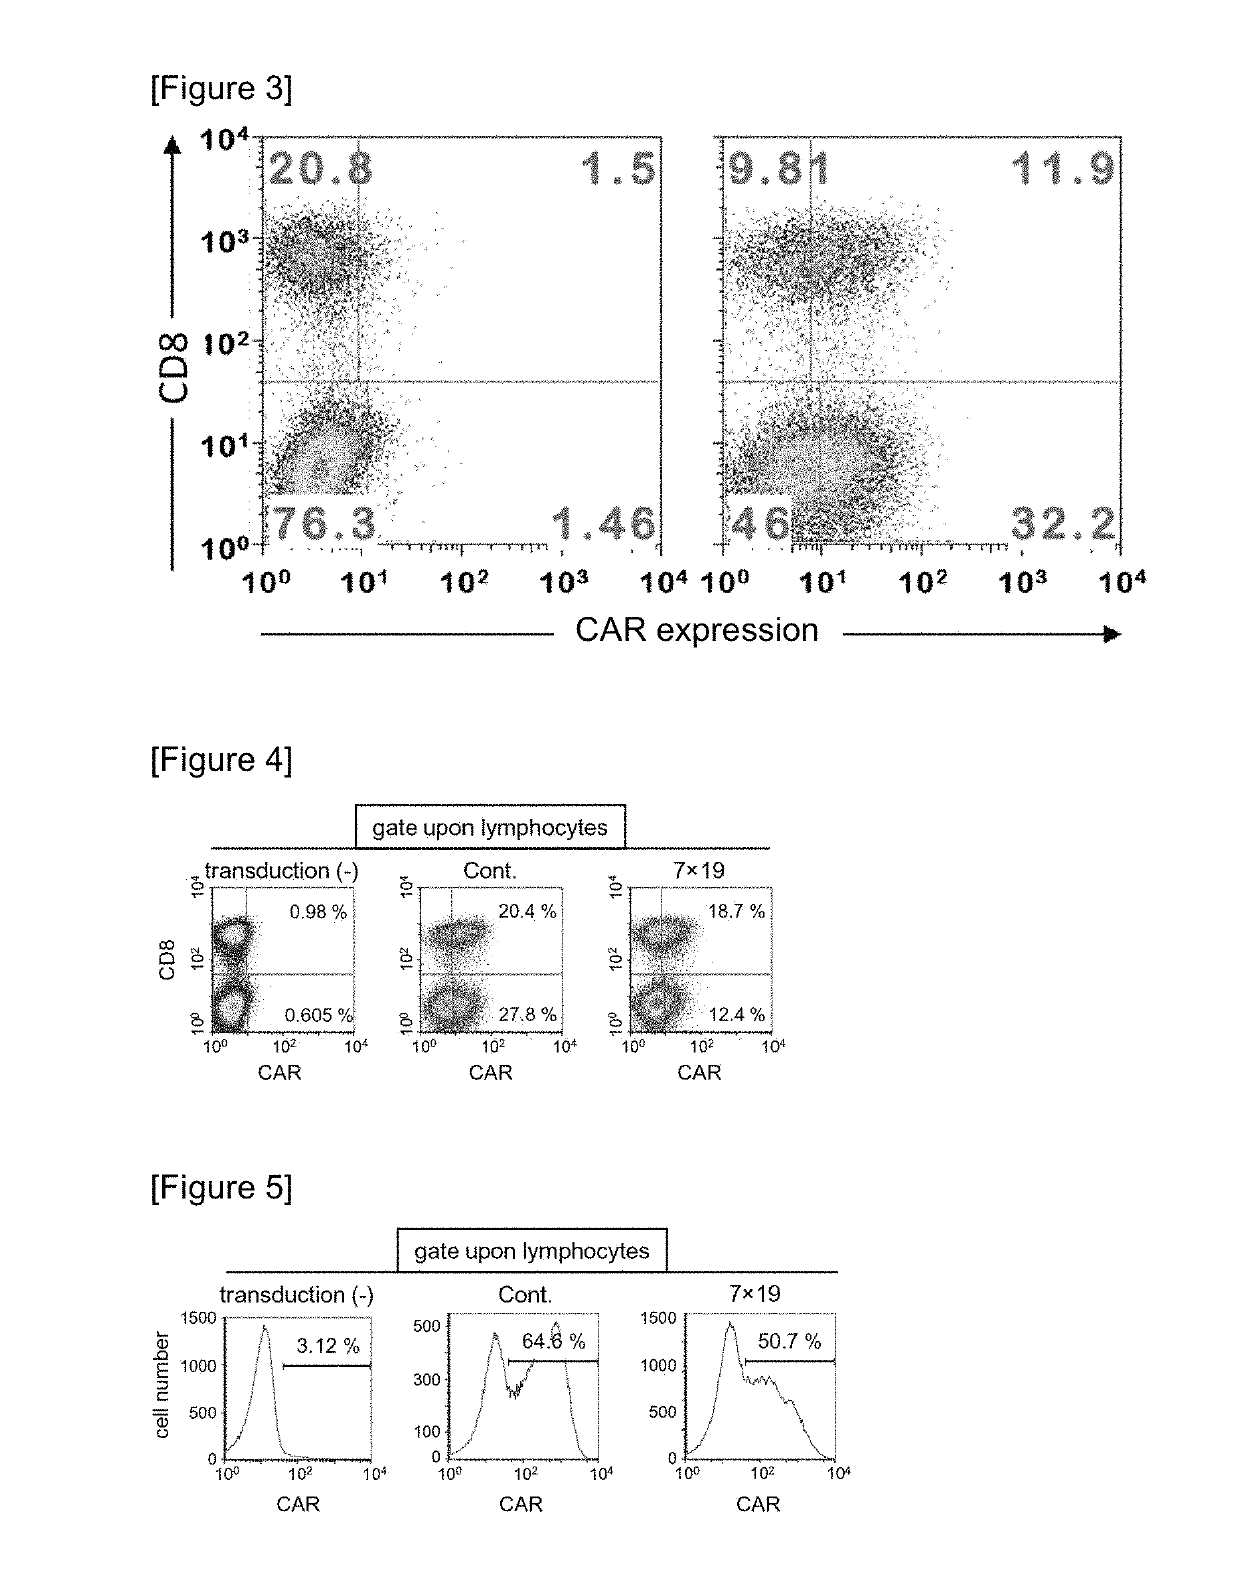 Car expression vector and car-expressing T cells